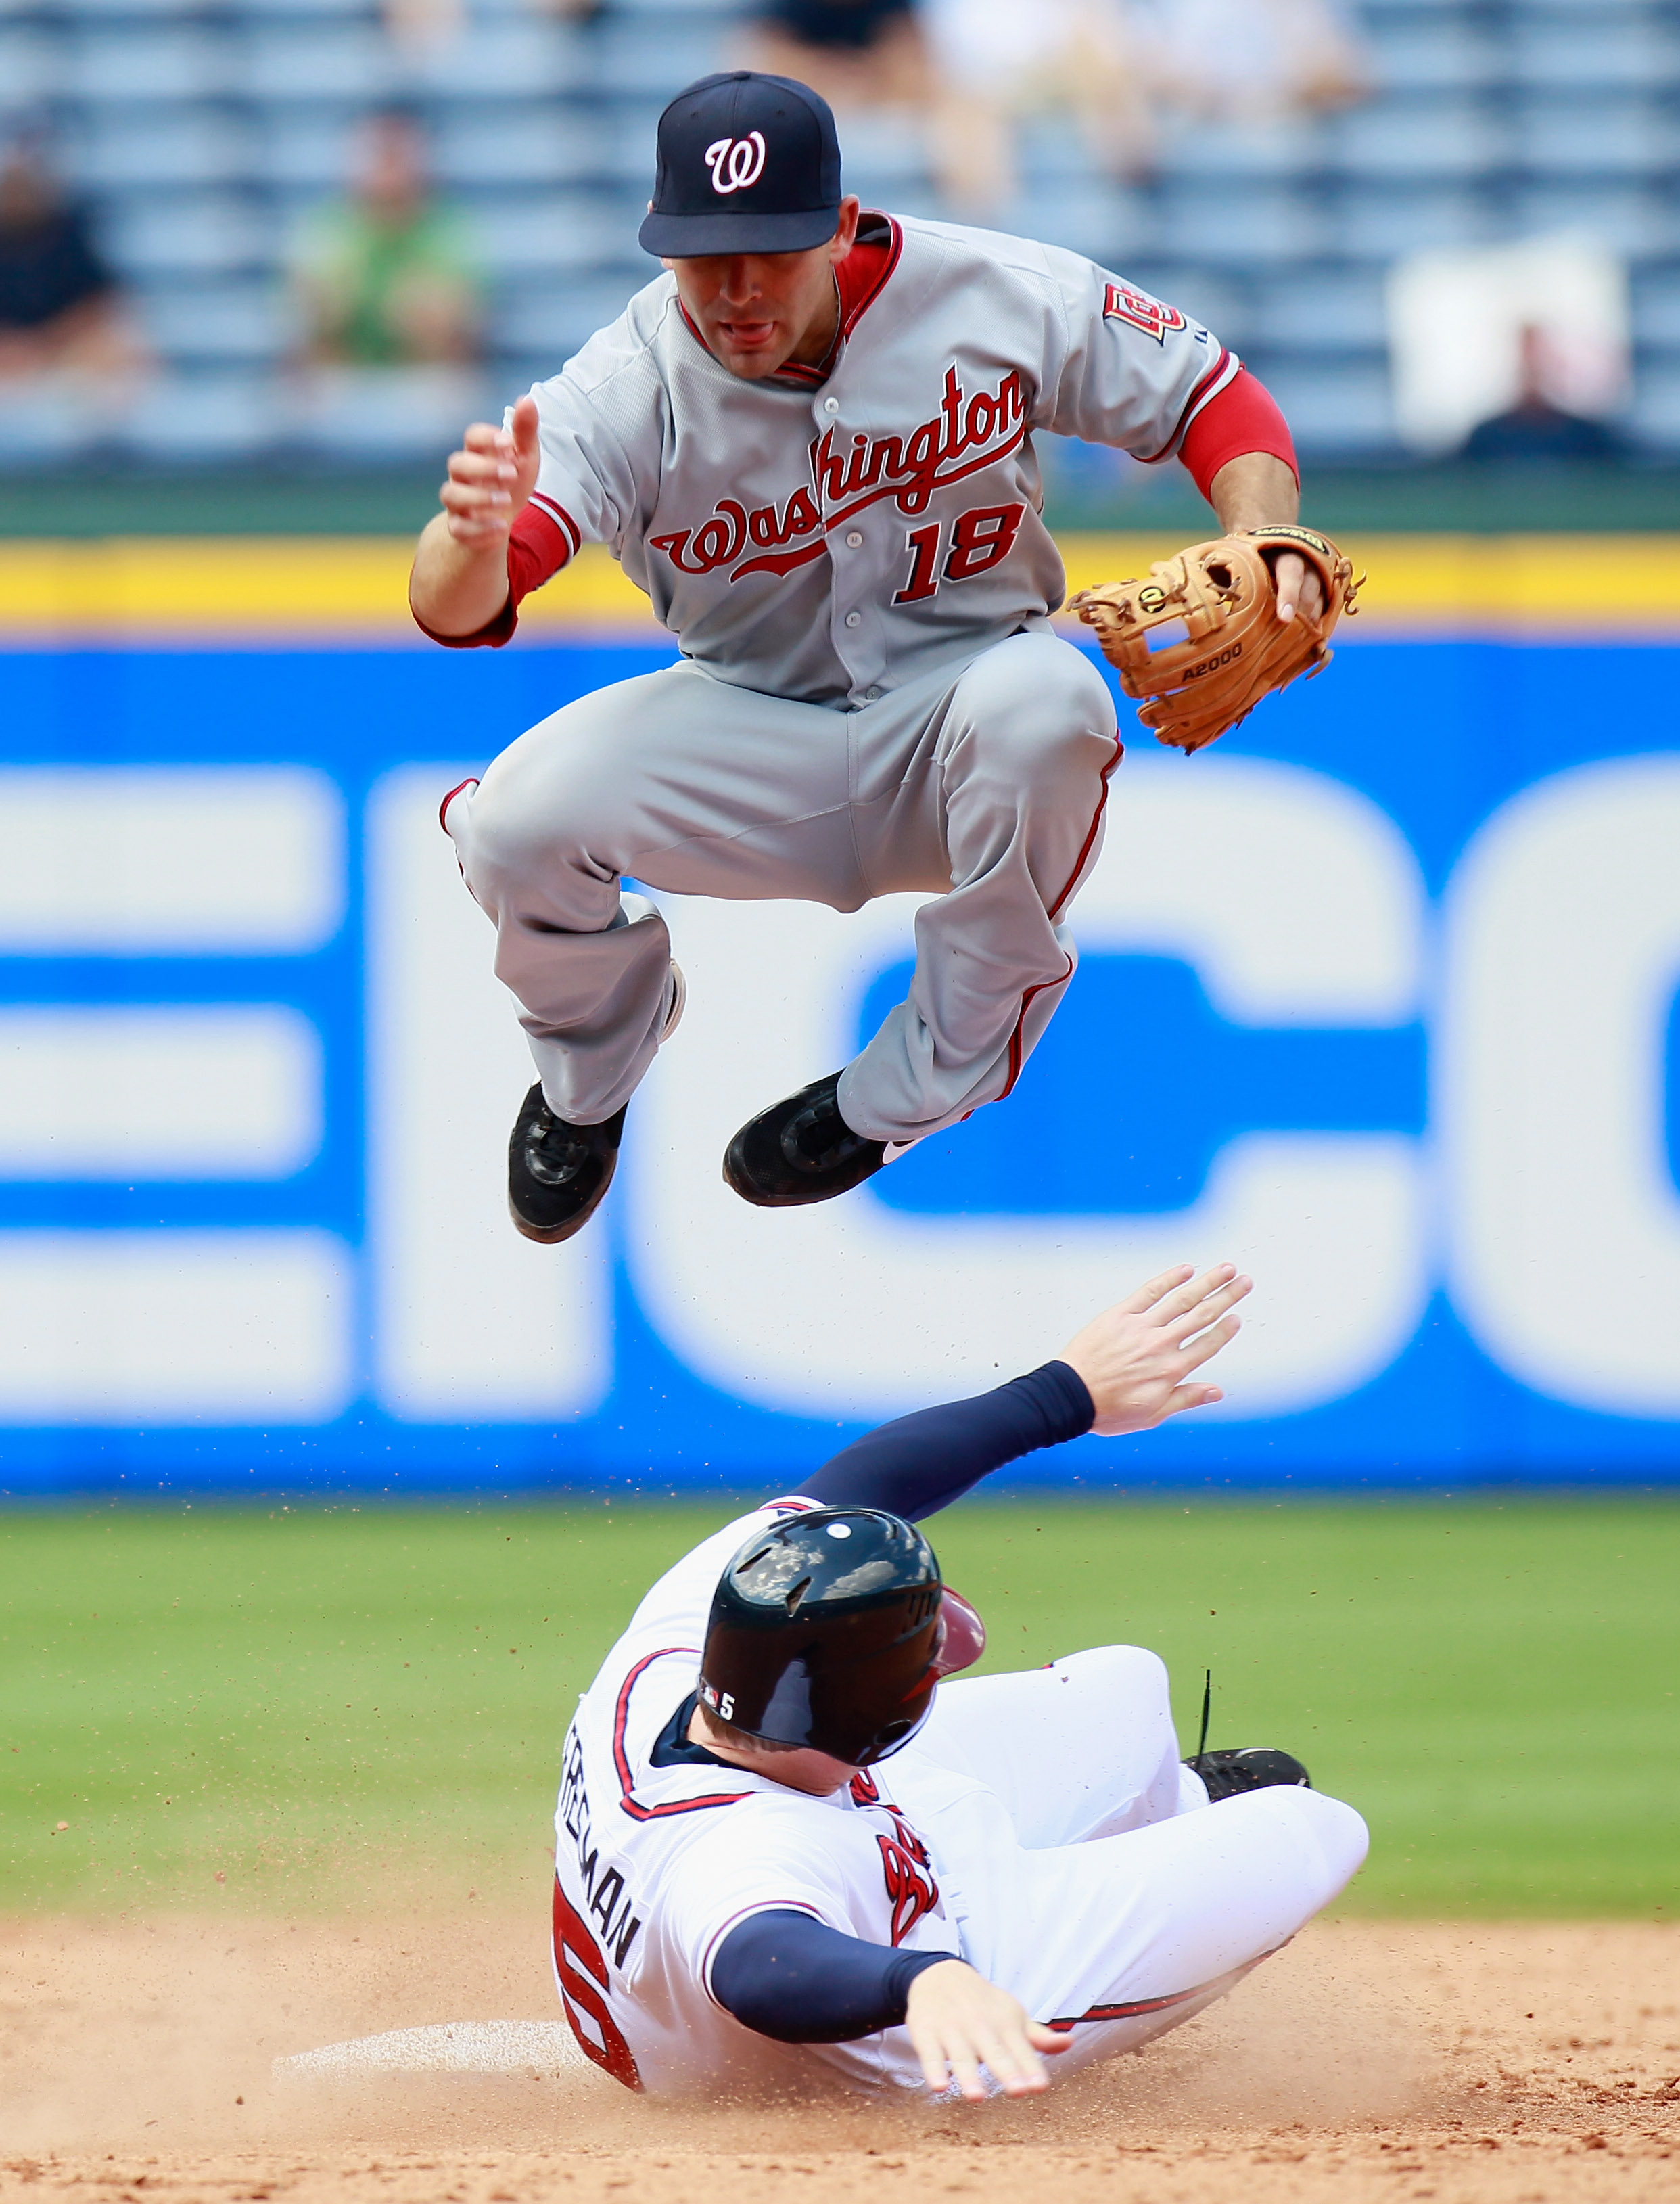 ATLANTA - SEPTEMBER 15:  Danny Espinosa #18 of the Washington Nationals turns a double play as he leaps over Freddie Freeman #5 of the Atlanta Braves at Turner Field on September 15, 2010 in Atlanta, Georgia.  (Photo by Kevin C. Cox/Getty Images)